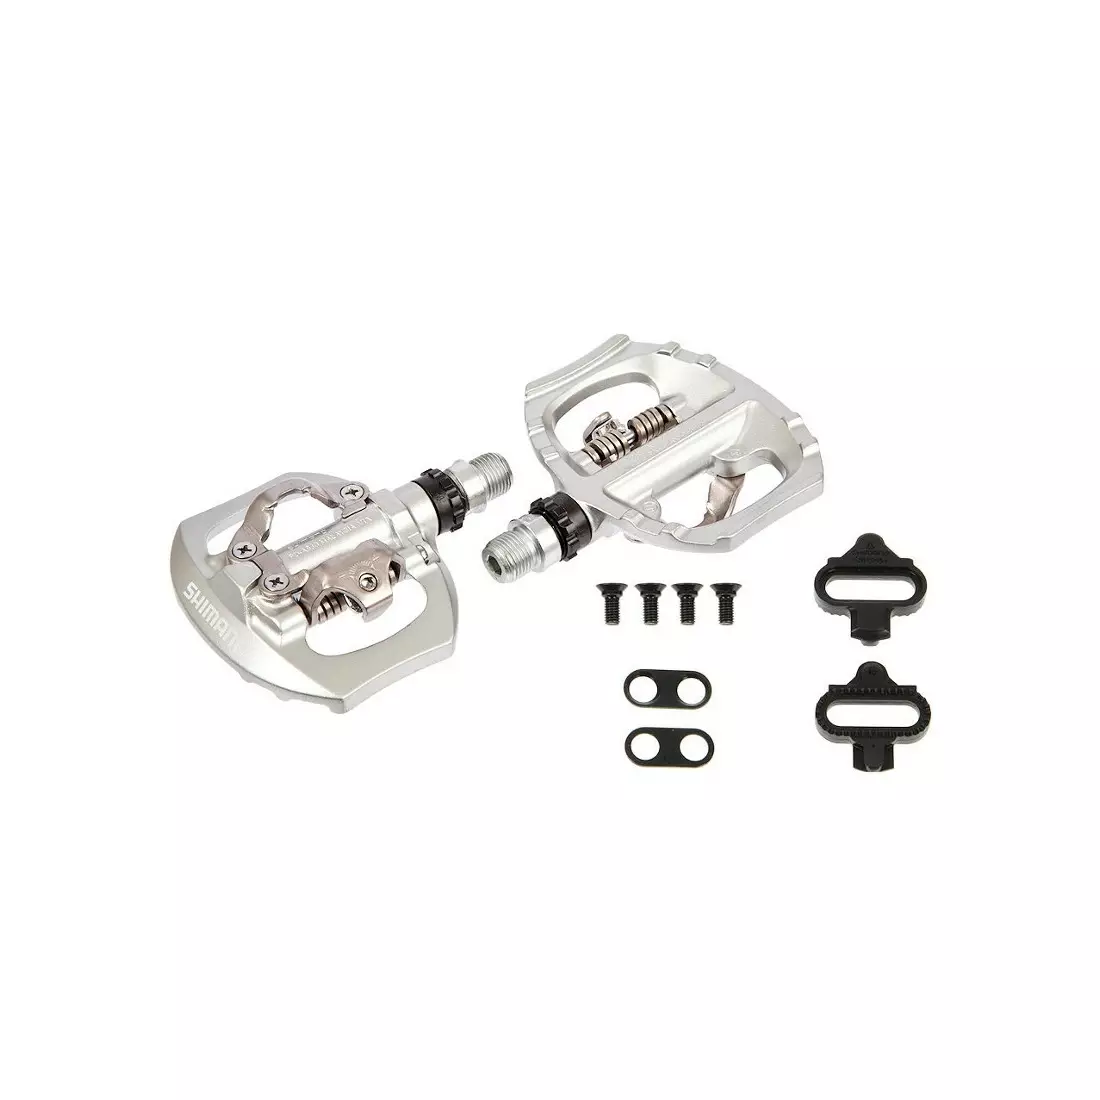 SHIMANO SPD-A530 MTB/trekking bicycle pedals with cleats